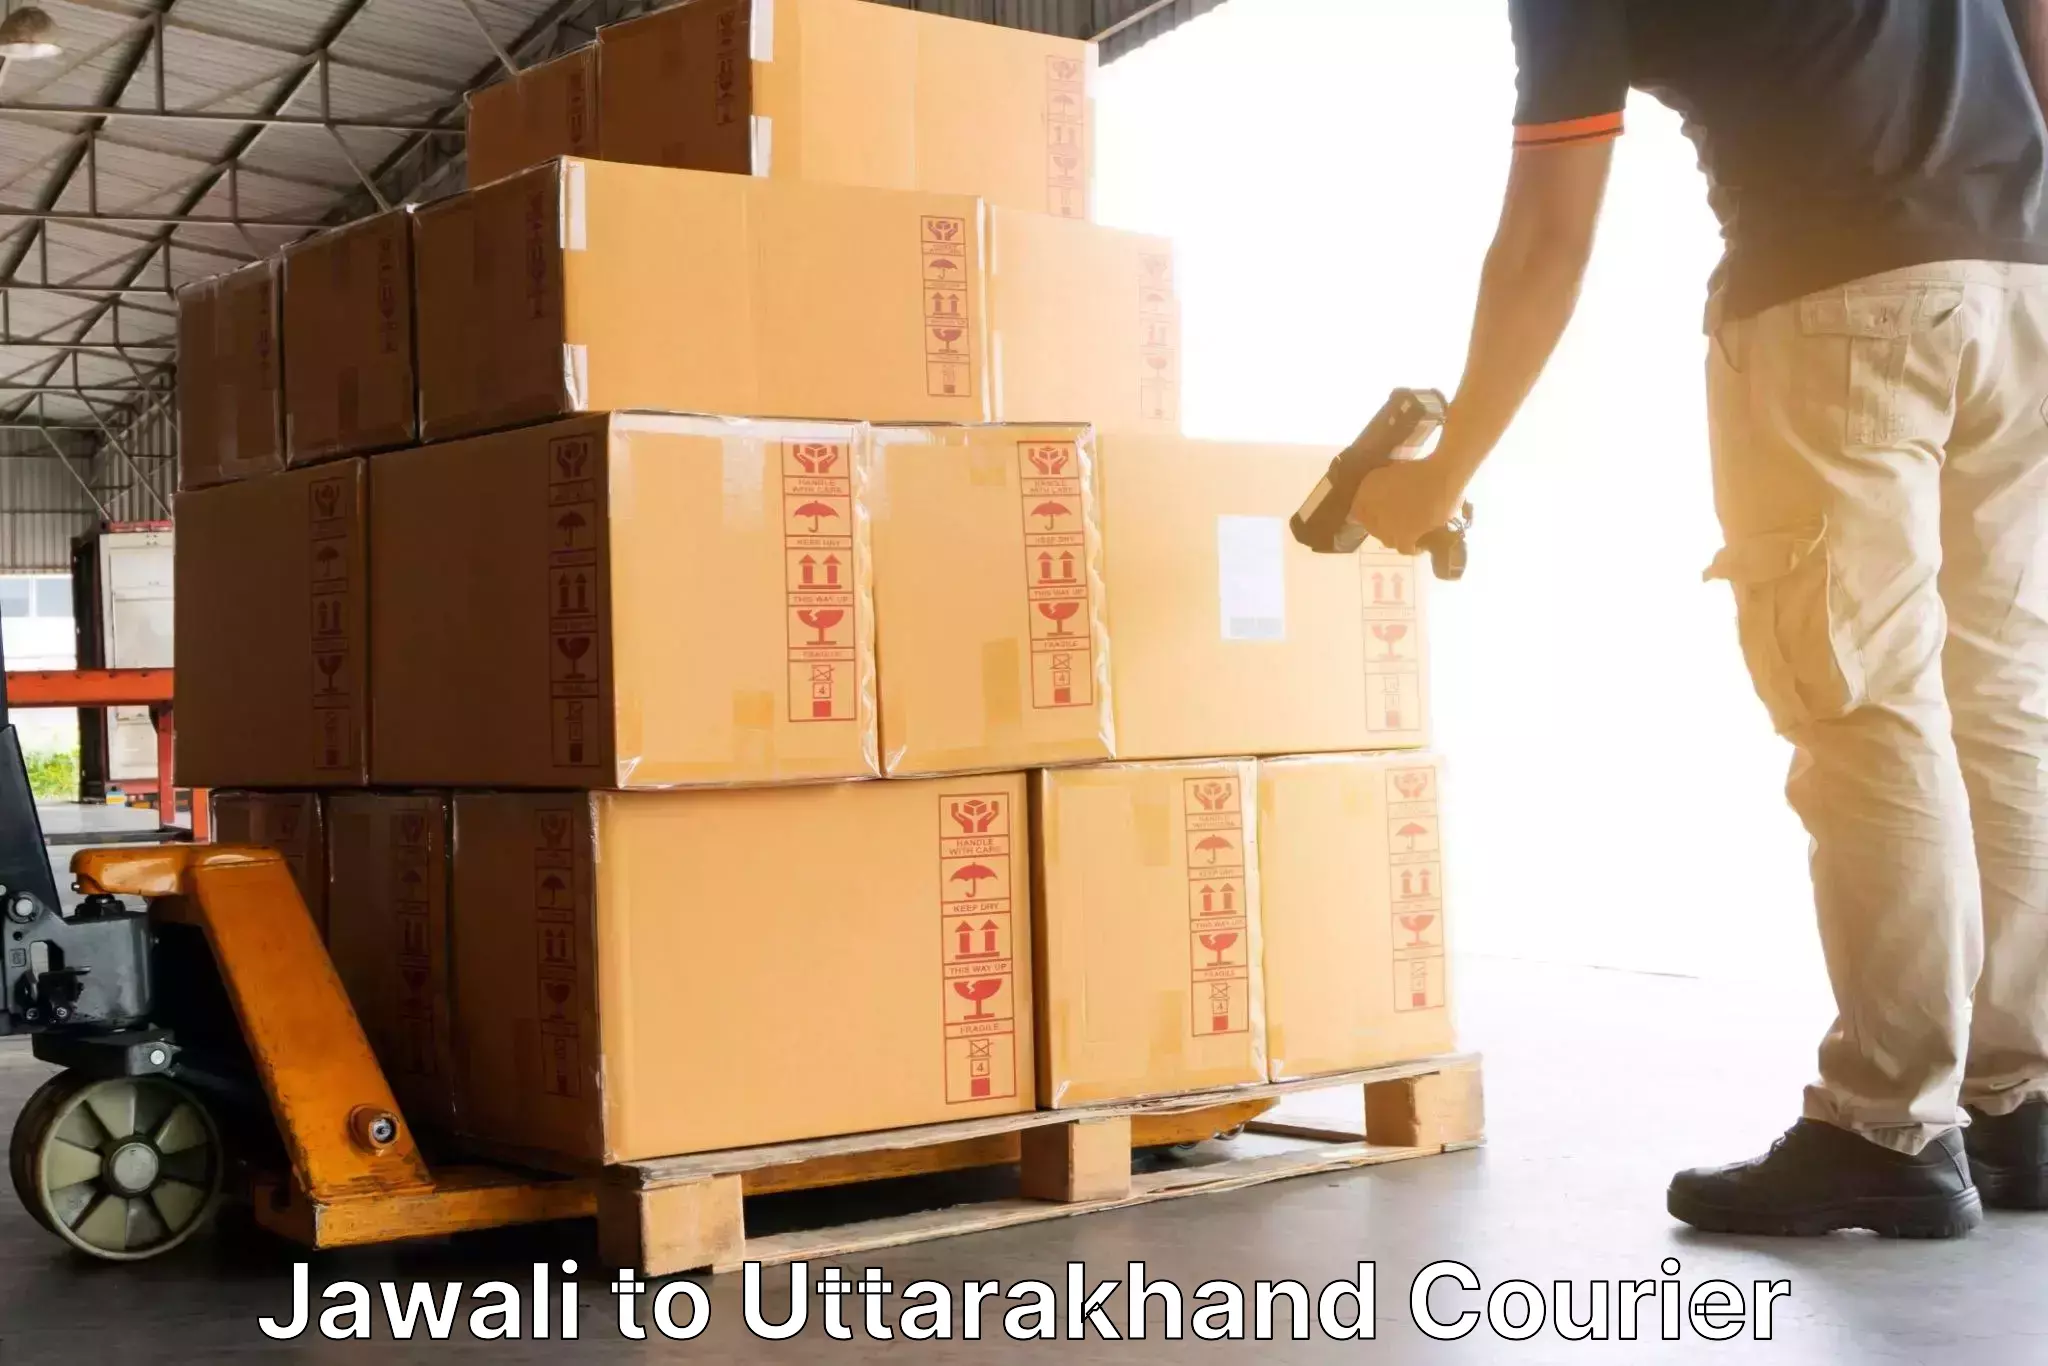 Express delivery capabilities Jawali to Rudrapur